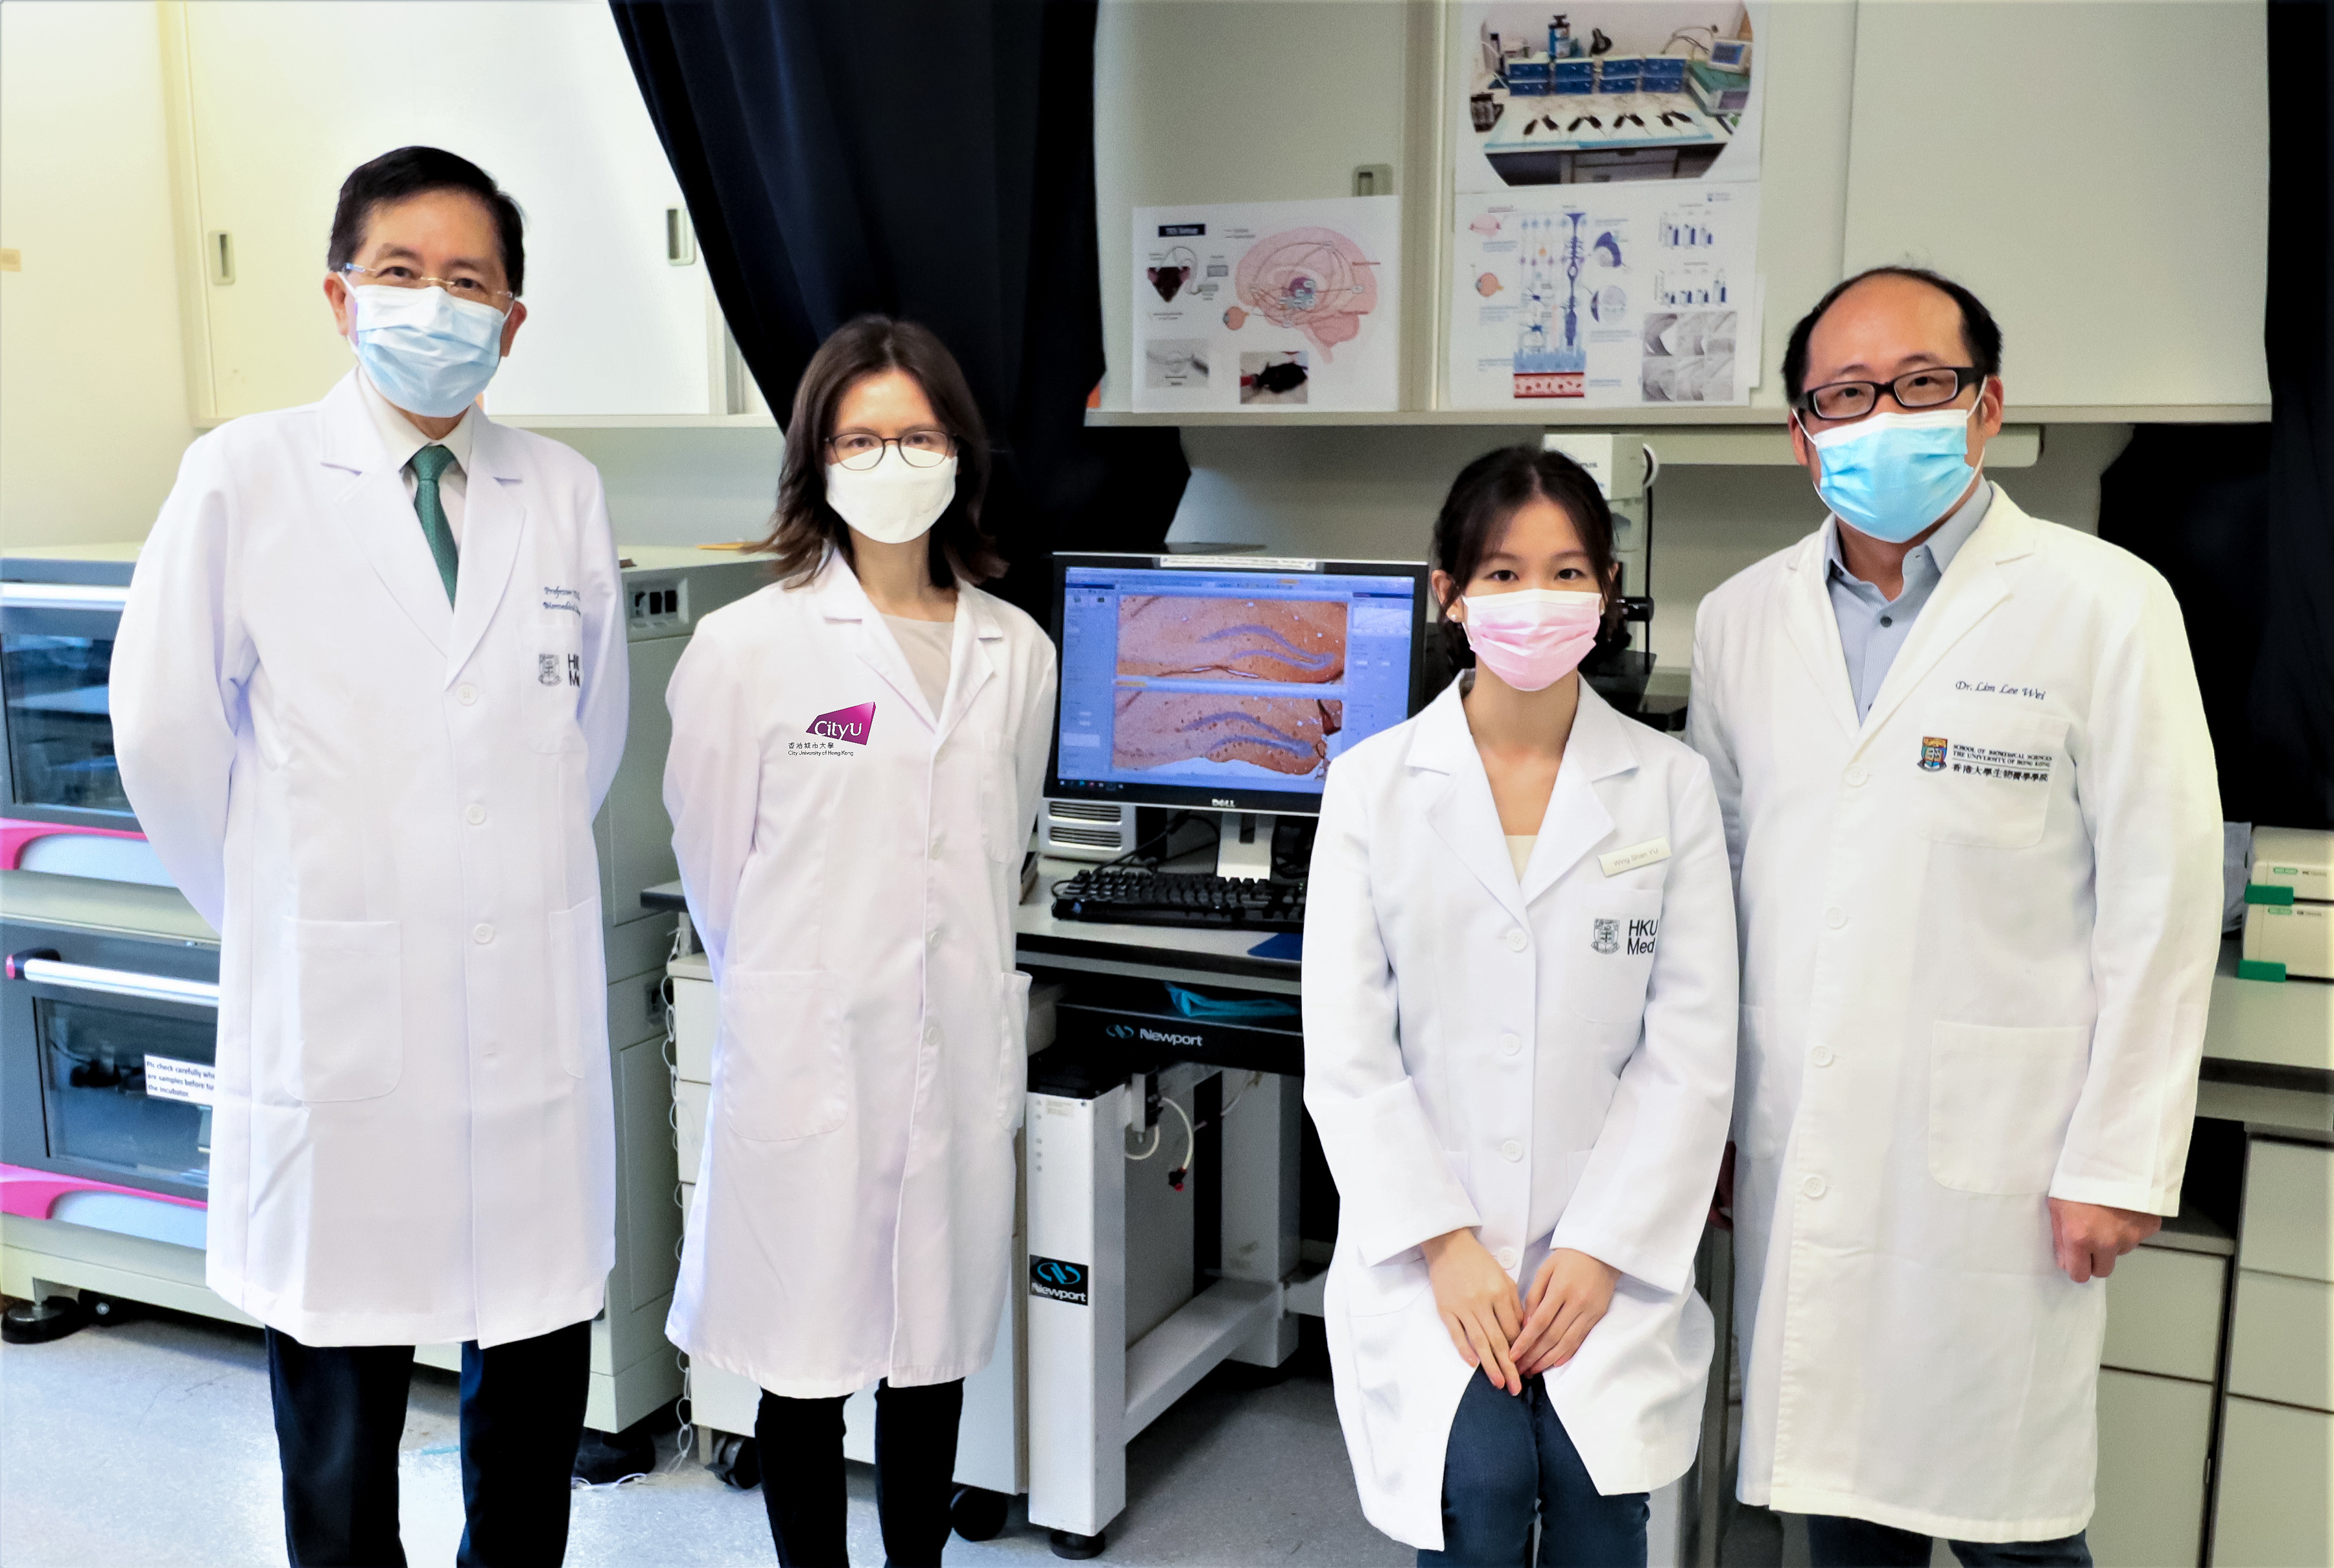 A joint research team from HKUMed and CityU.